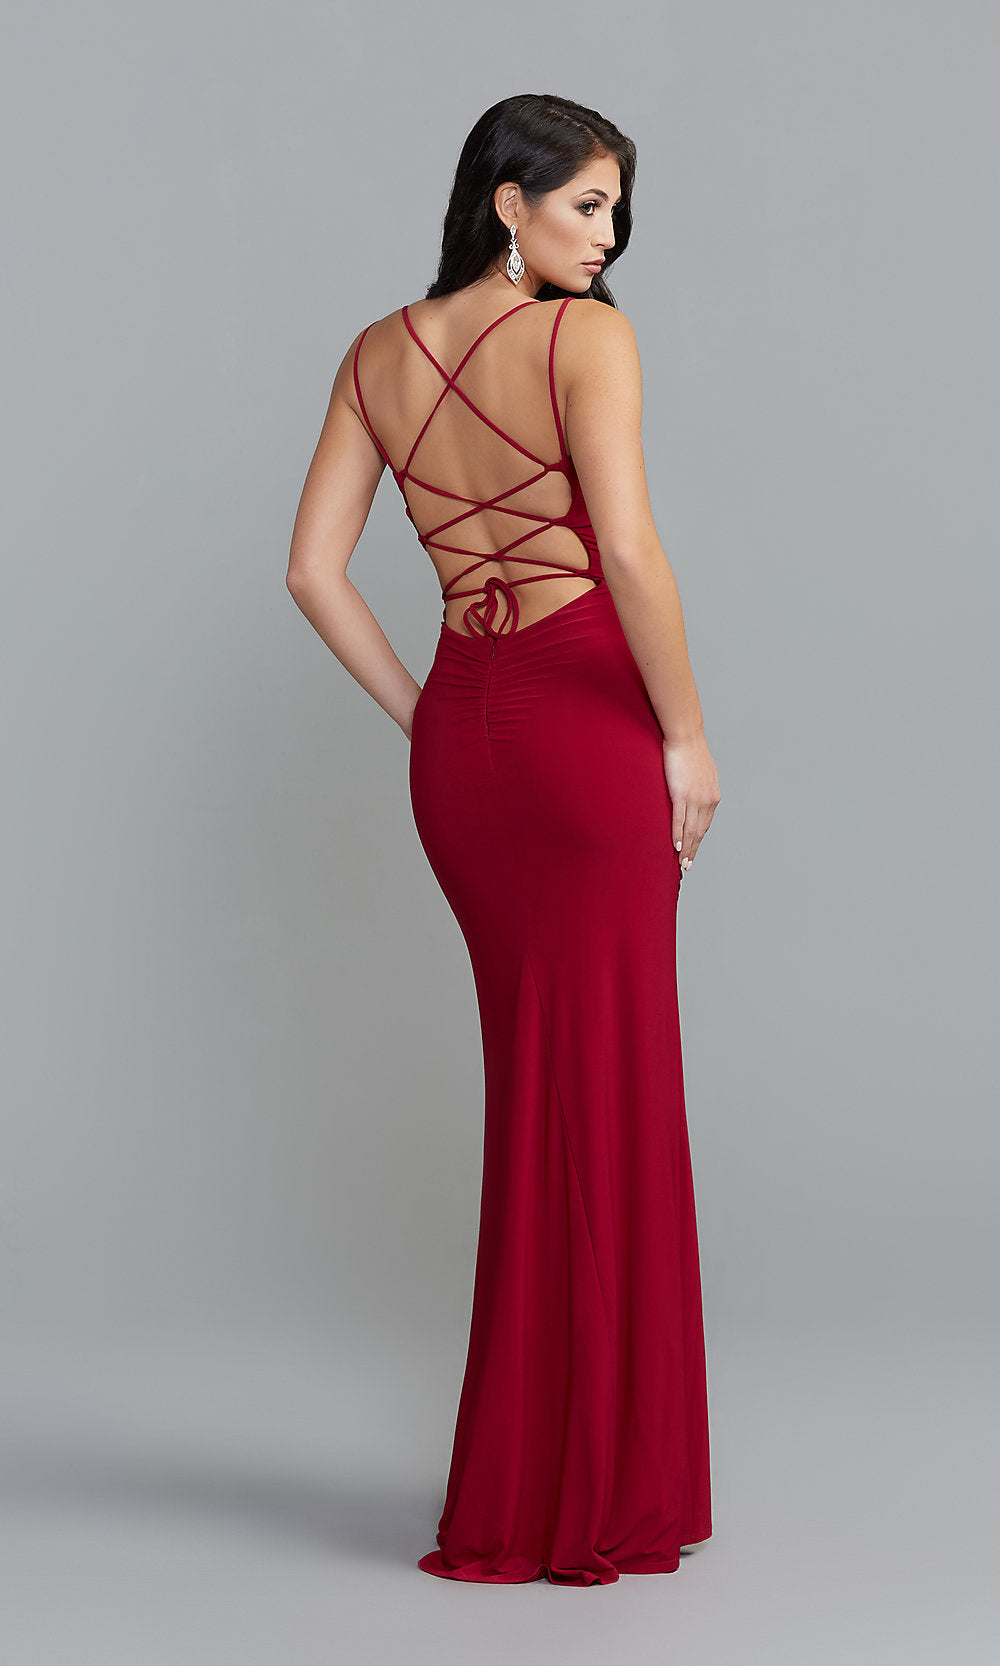 Skim Pygmalion global Jump Tight Side-Ruched Long Red Prom Dress - PromGirl